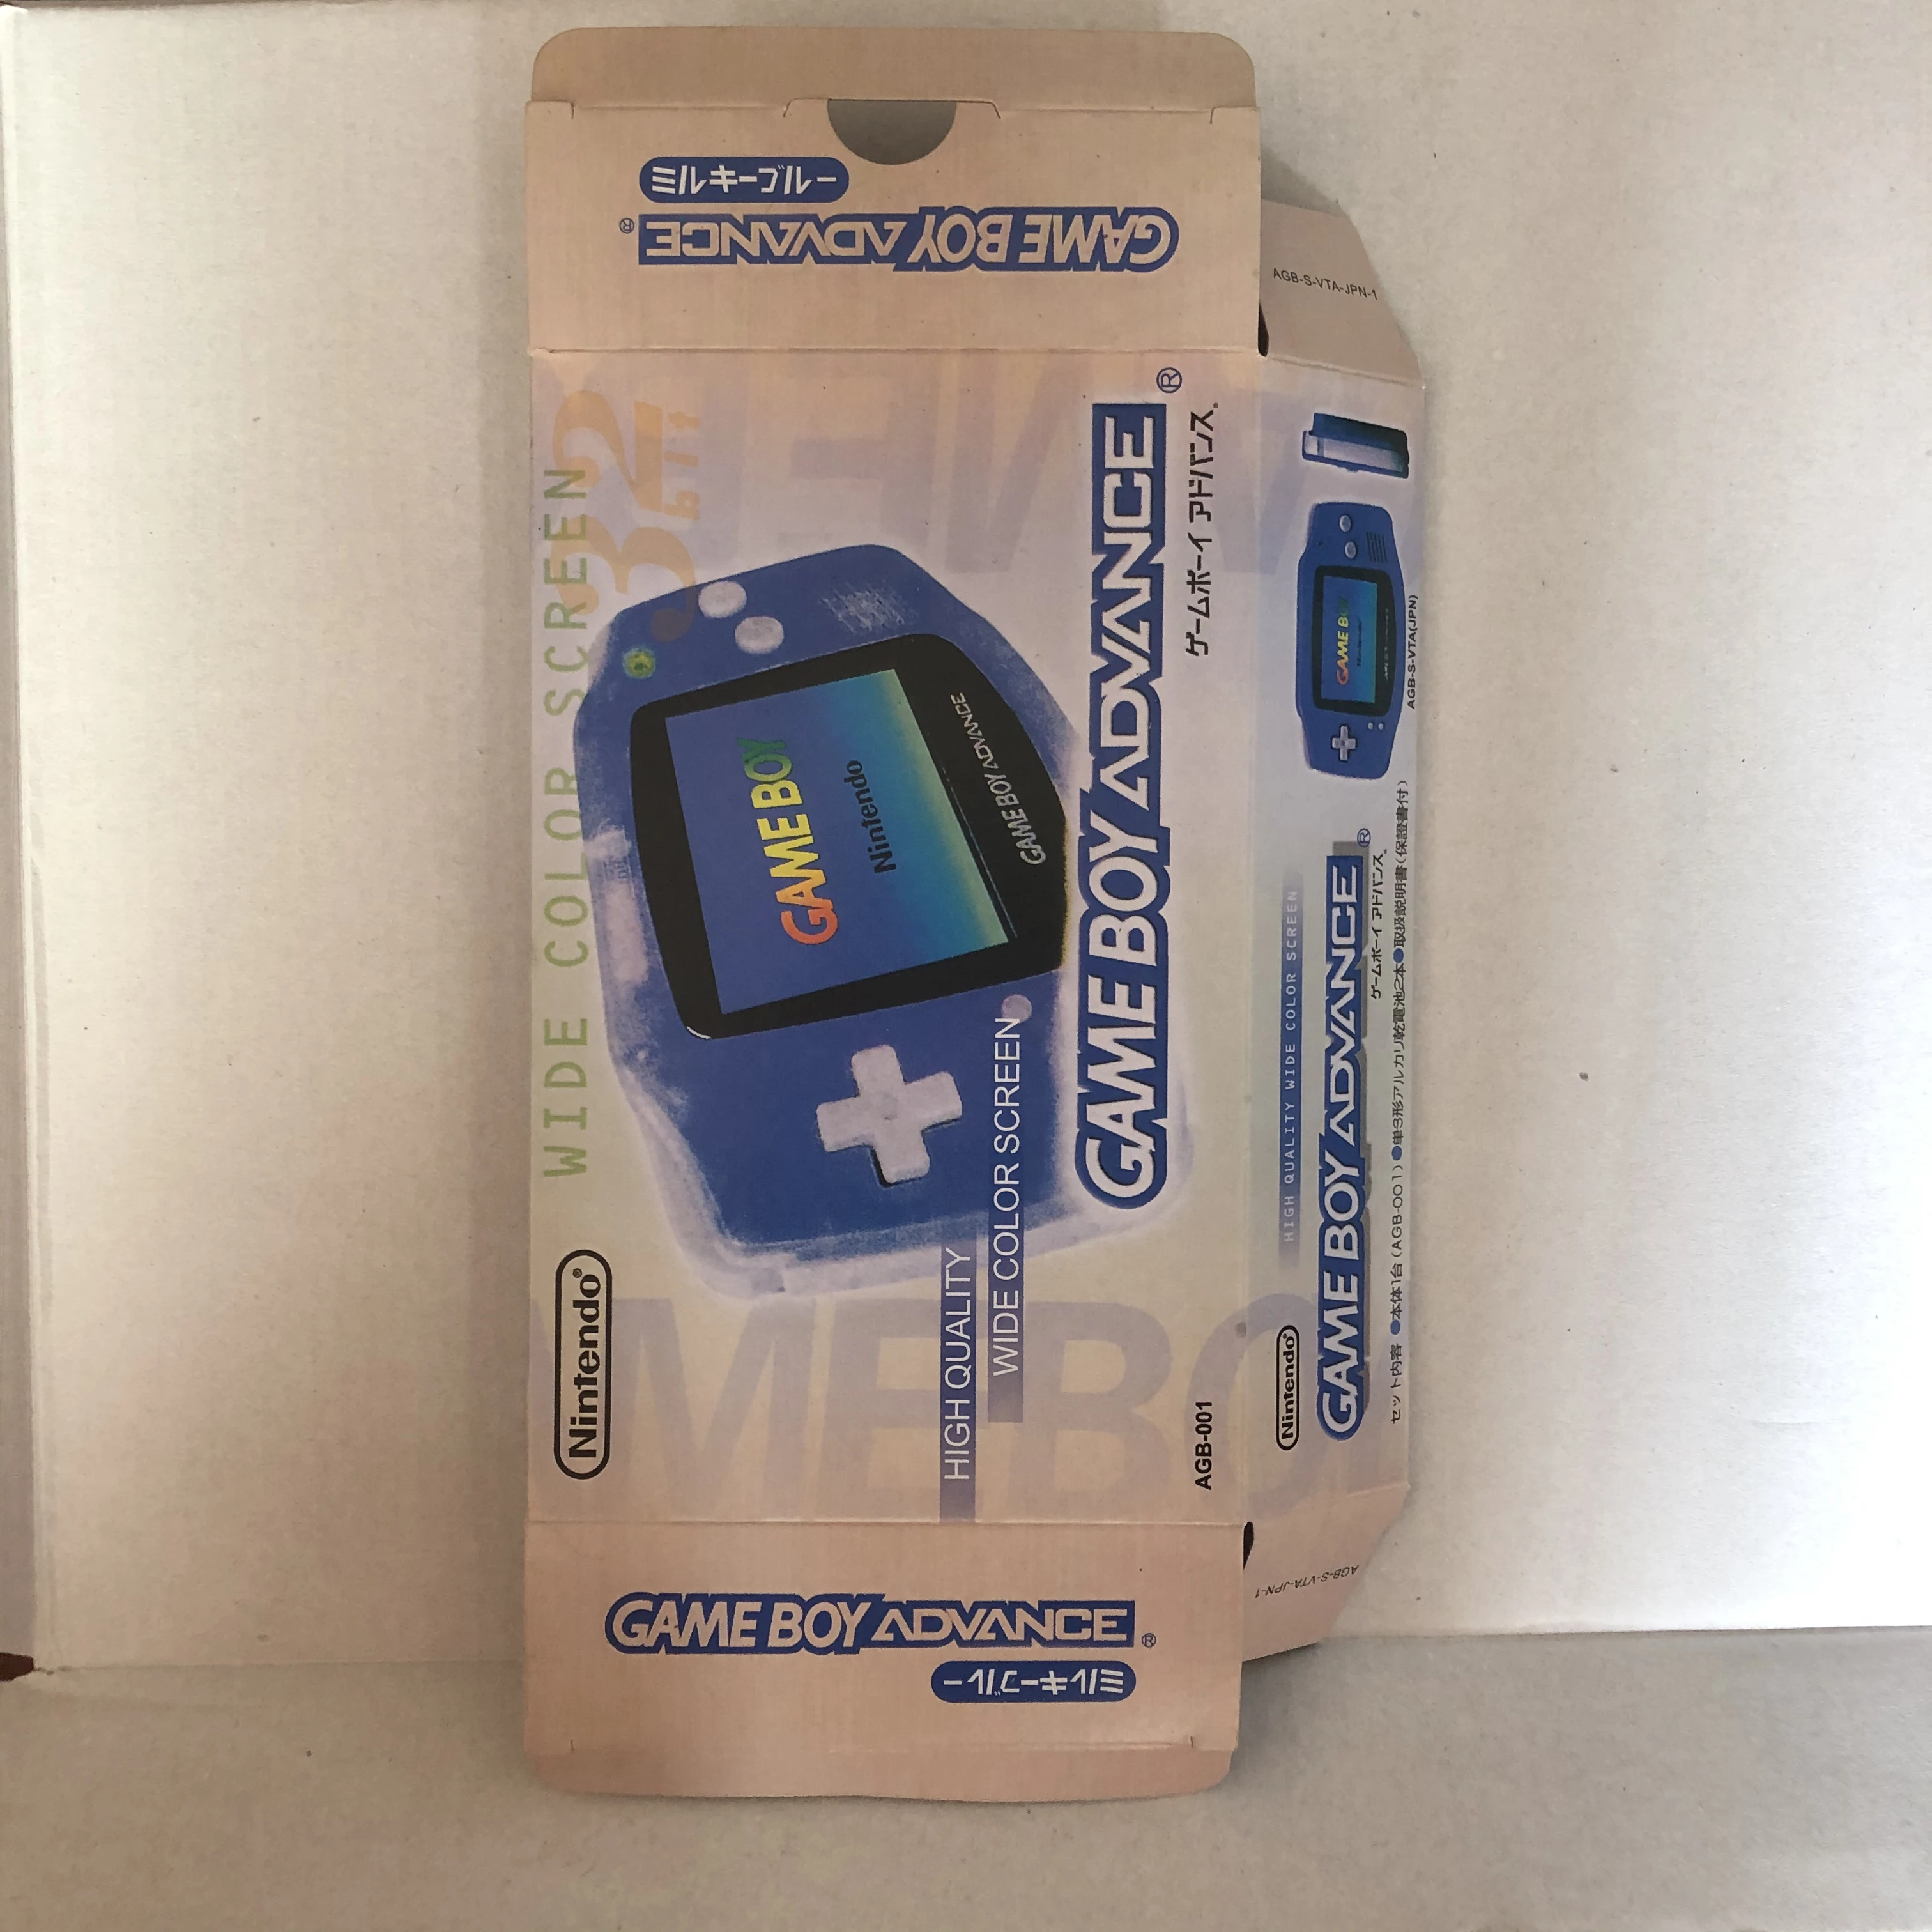 Retail Package Box For Nintendo Gameboy Advance Gba Console Retail